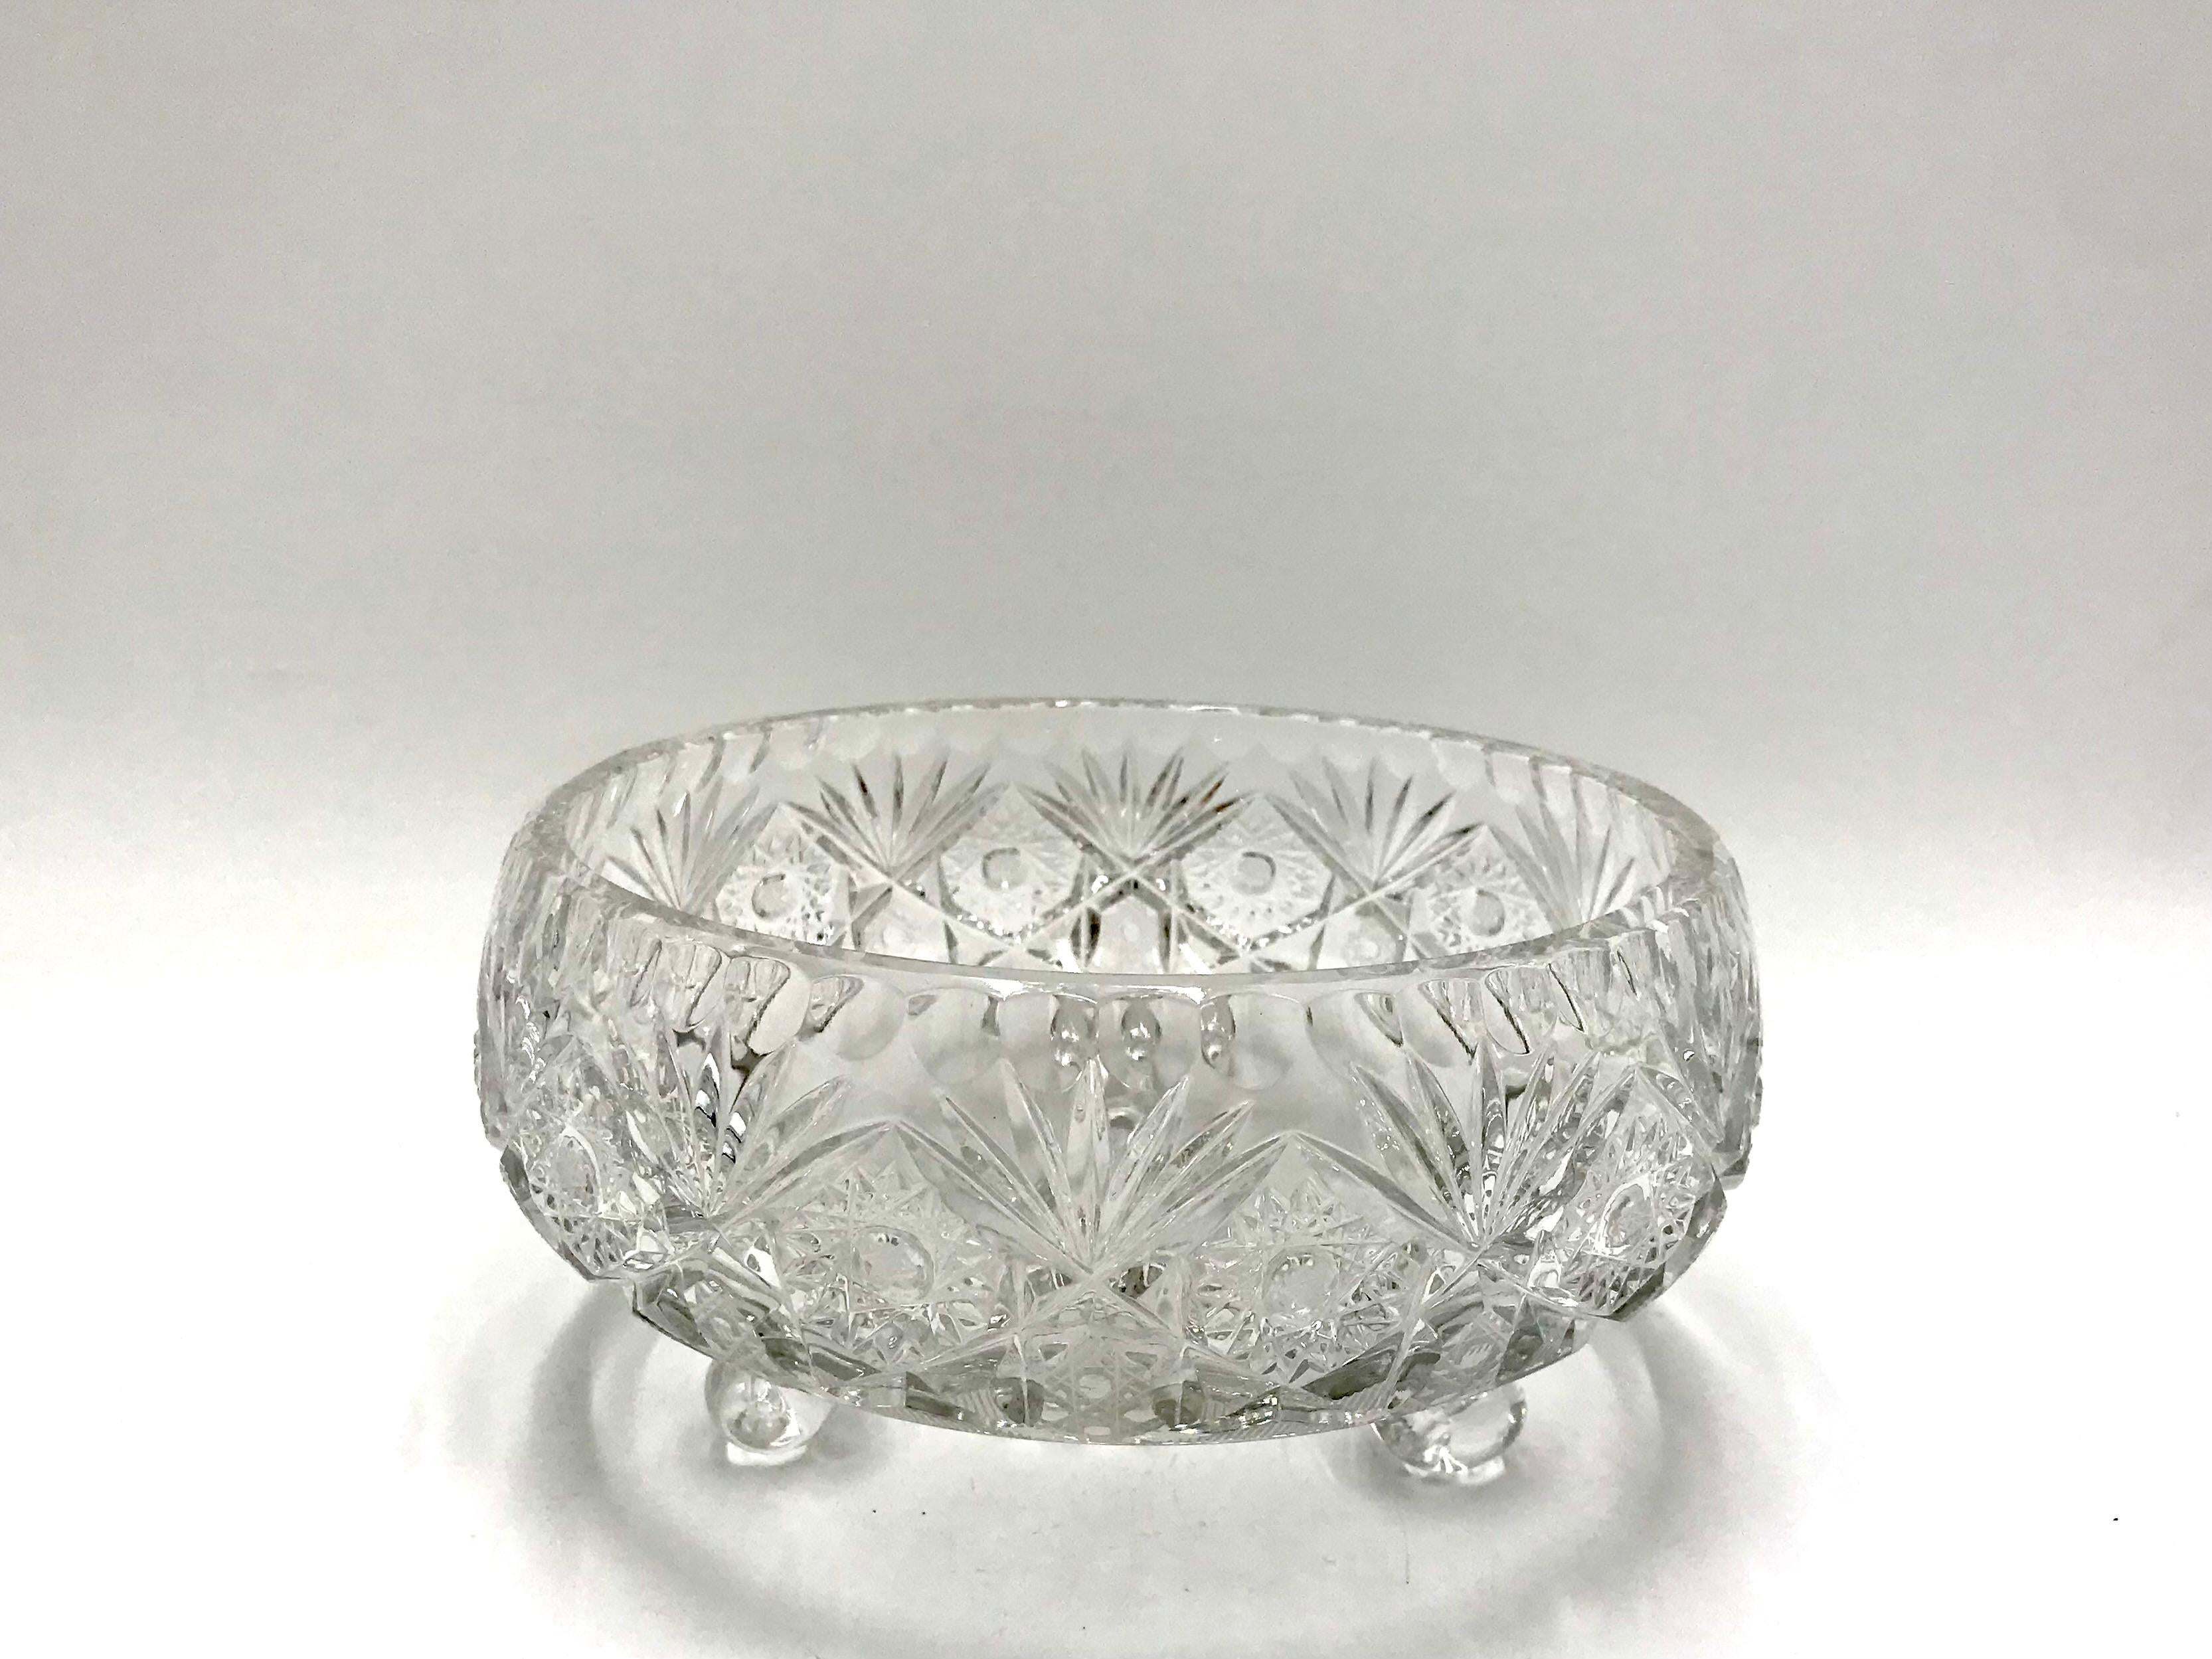 Crystal bowl 
Made in Poland in the 1950s / 1960s.
Very good condition.
Dimensions: height 10cm, diameter 18.